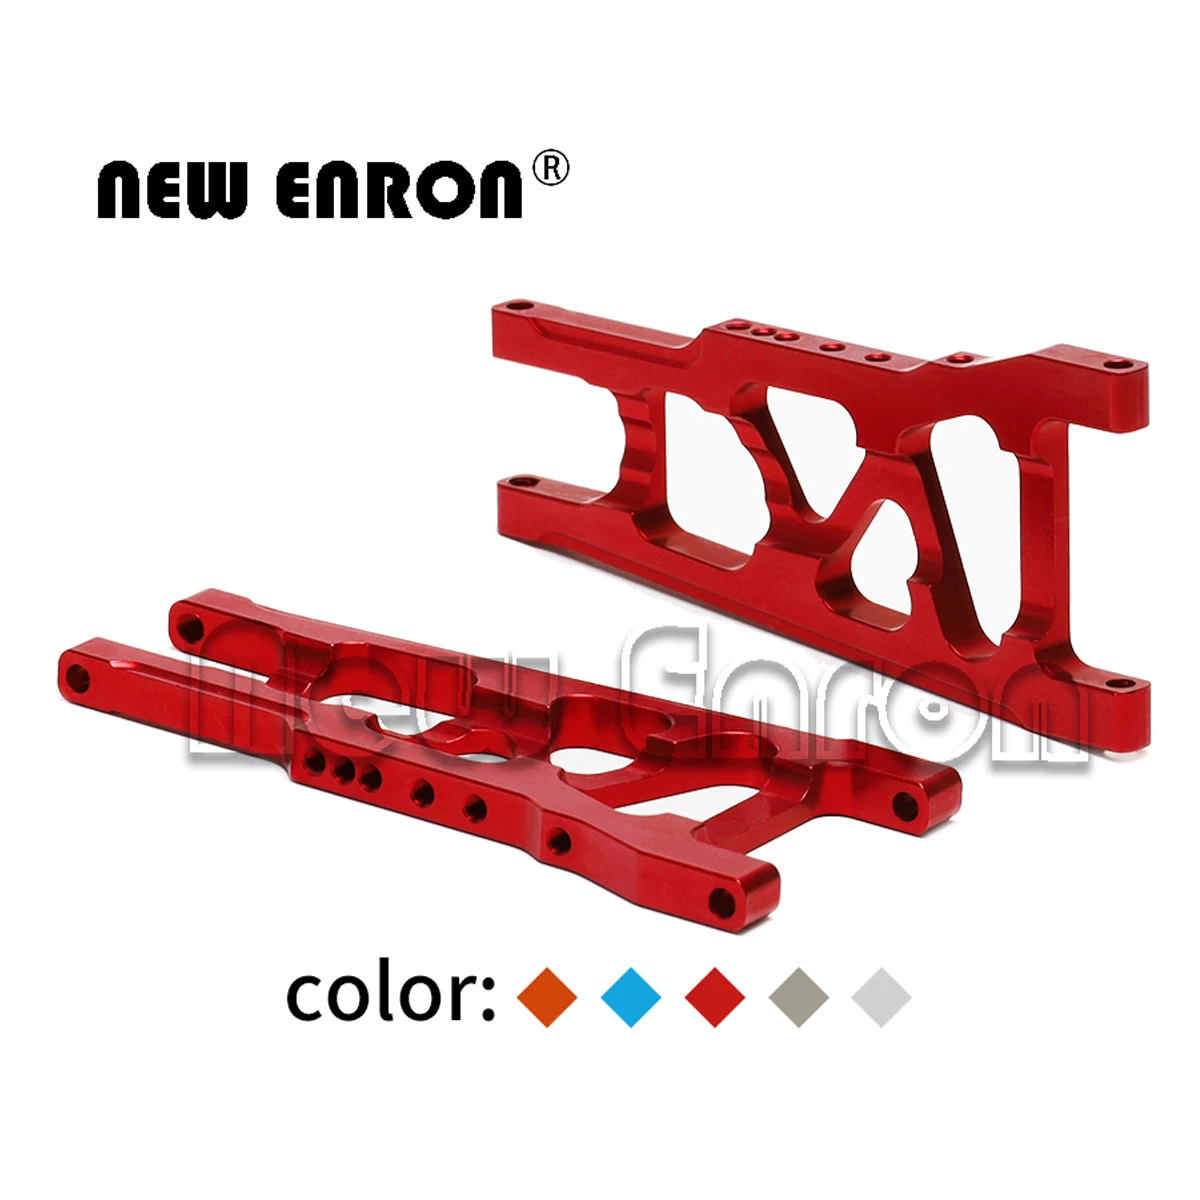 

NEW ENRON 3655X Aluminum Lower Suspension Arms Front/Rear 2P For RC Traxxas 1/10 Slash 4x4 Rustler Stampede XO-1 Upgrade Parts